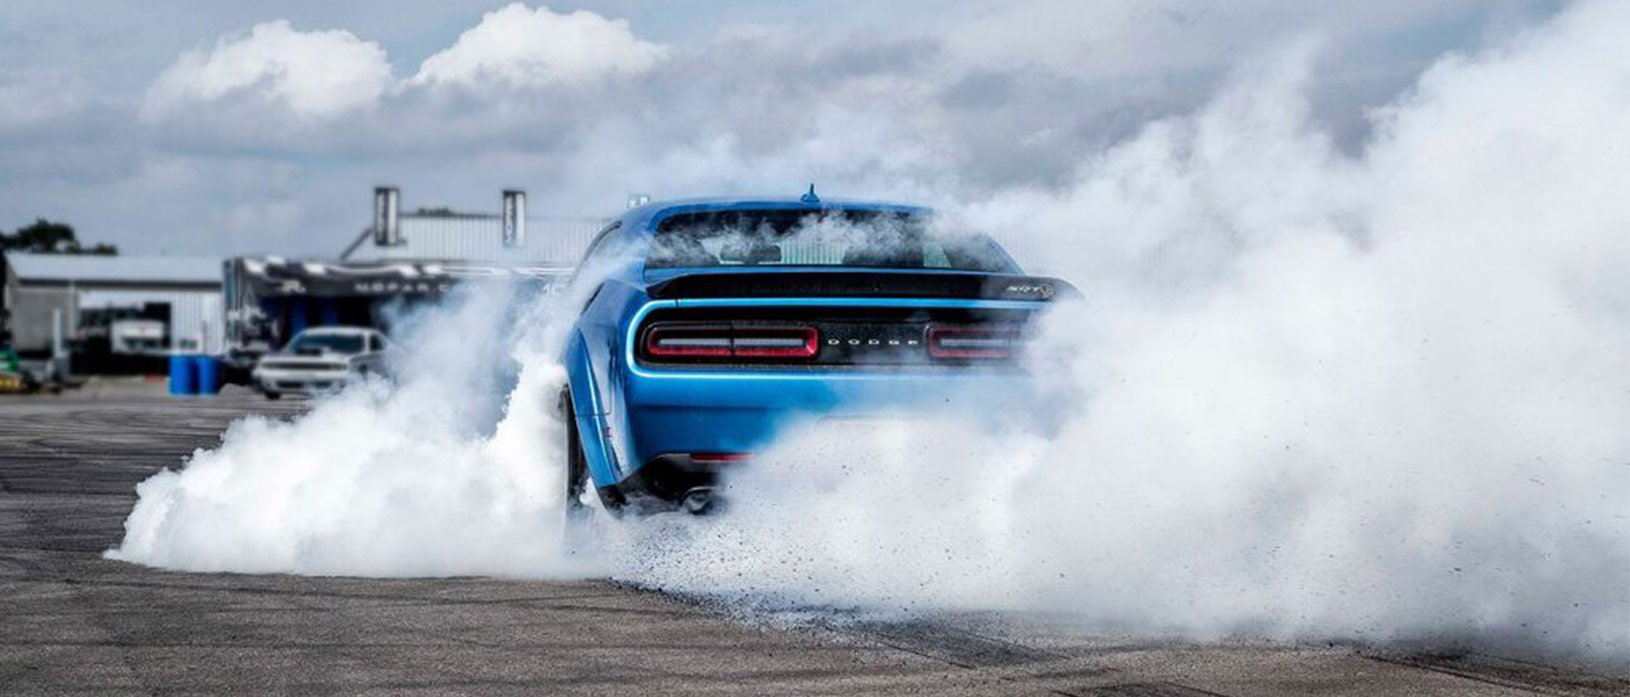 Get More Power Out of Your 6.2L Supercharged Mopar<sub>®</sub> Vehicle Part 1 – The Foundation